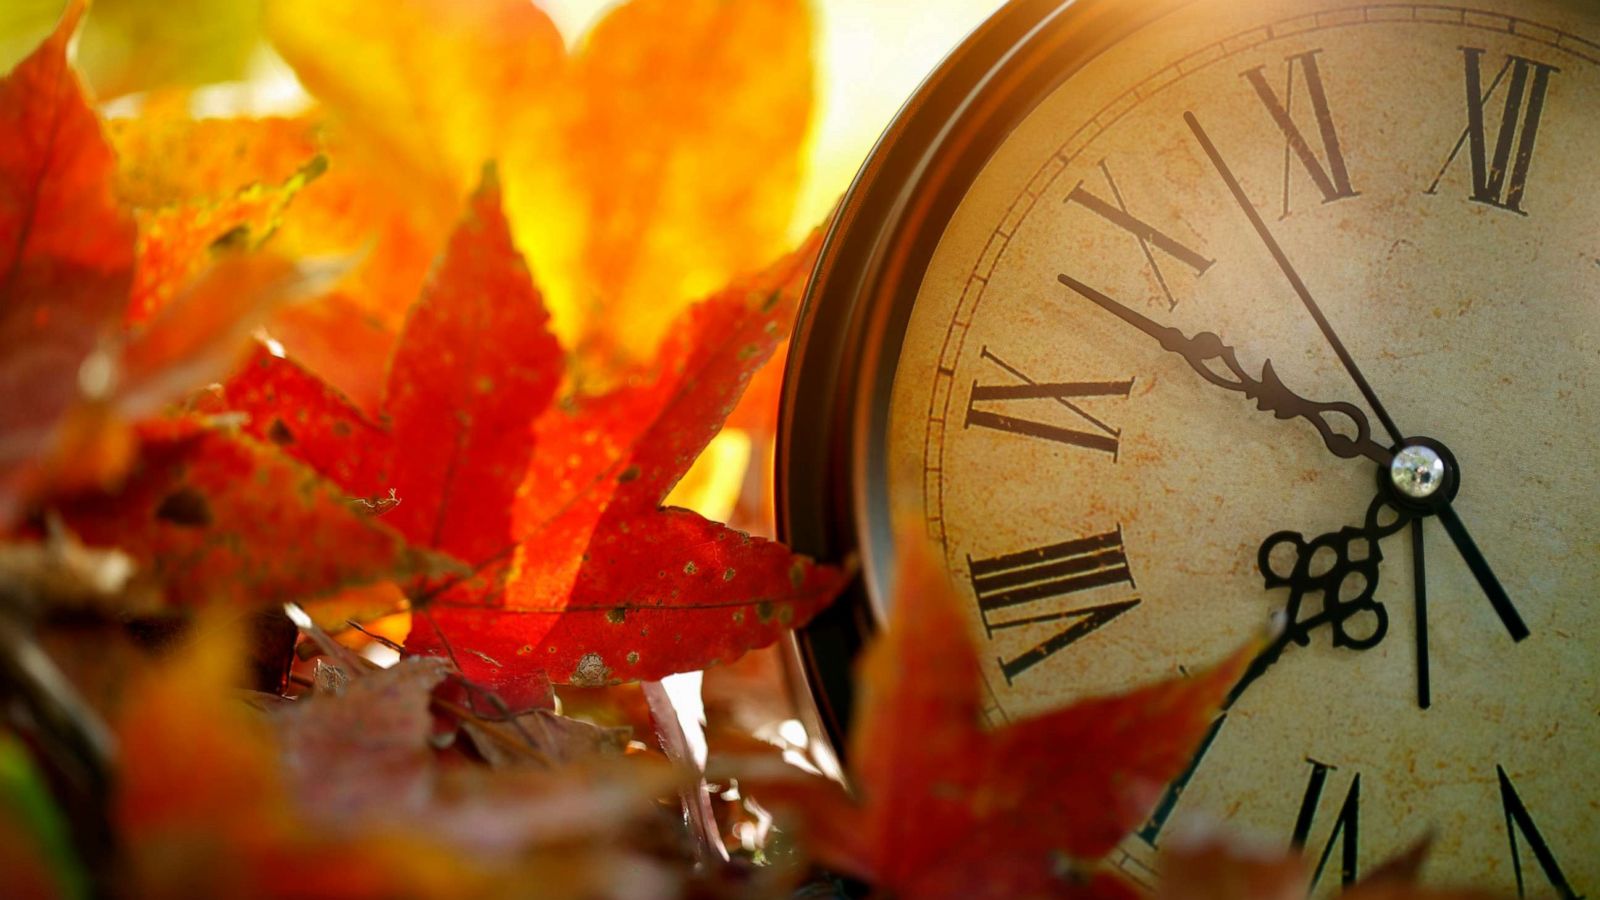 Time to set your clocks back as daylight saving time 2023 is ending